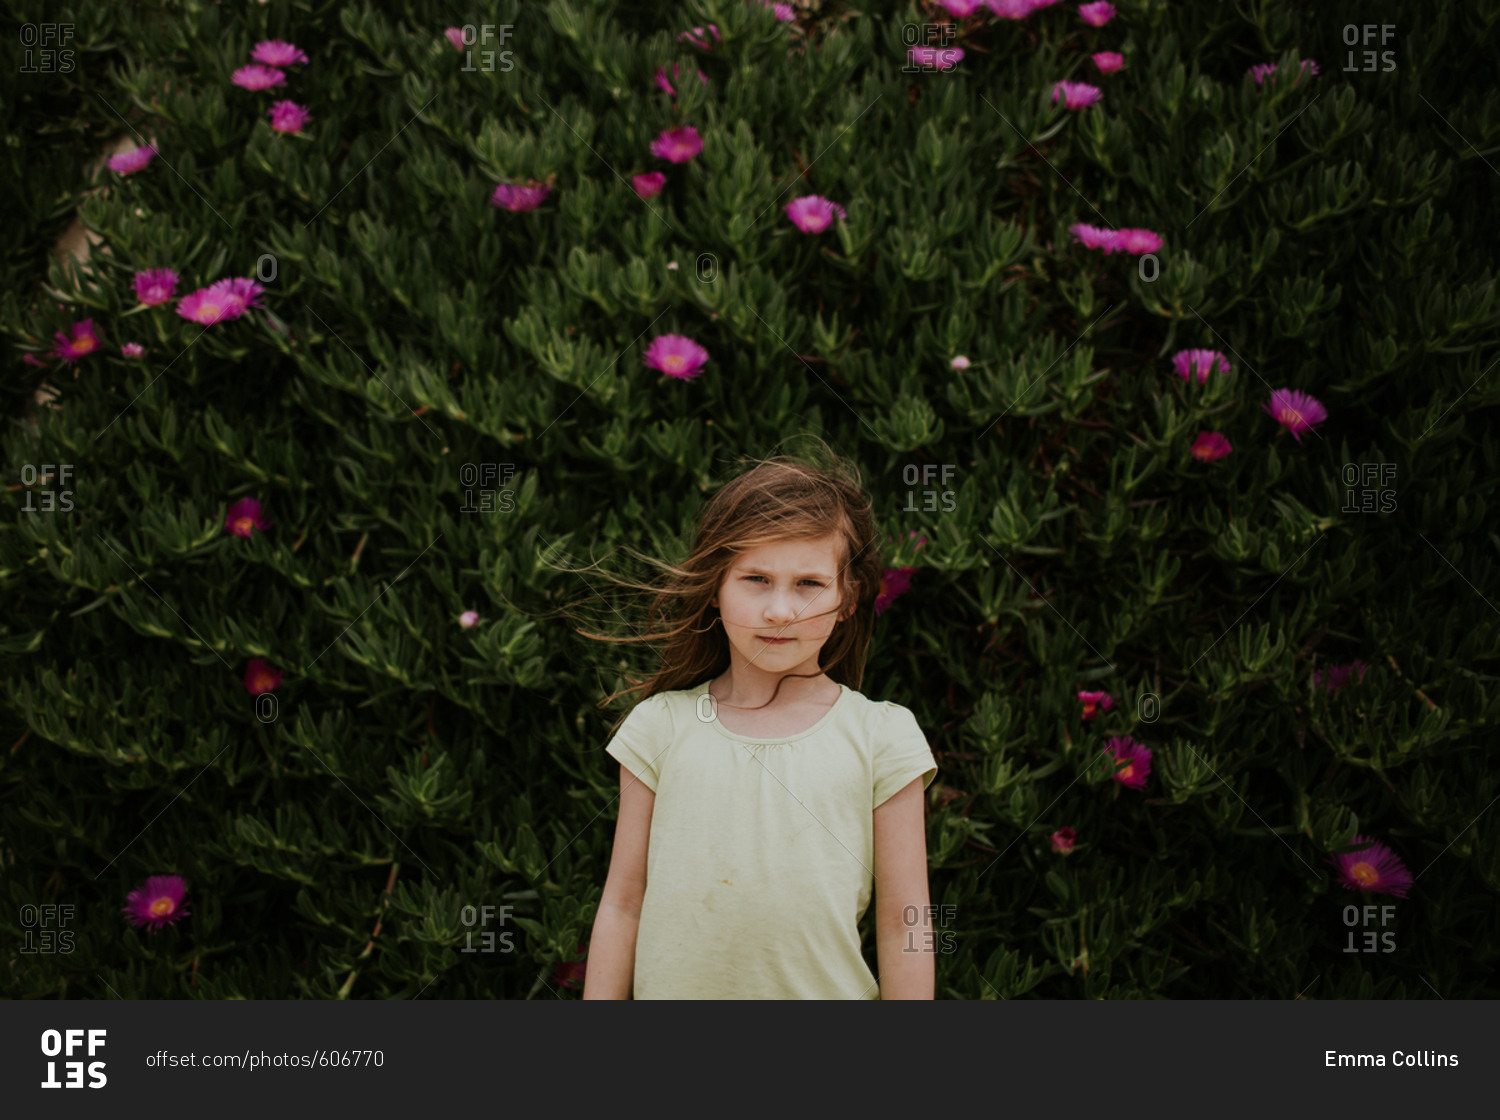 Young girl standing in front of bush with pink flowers